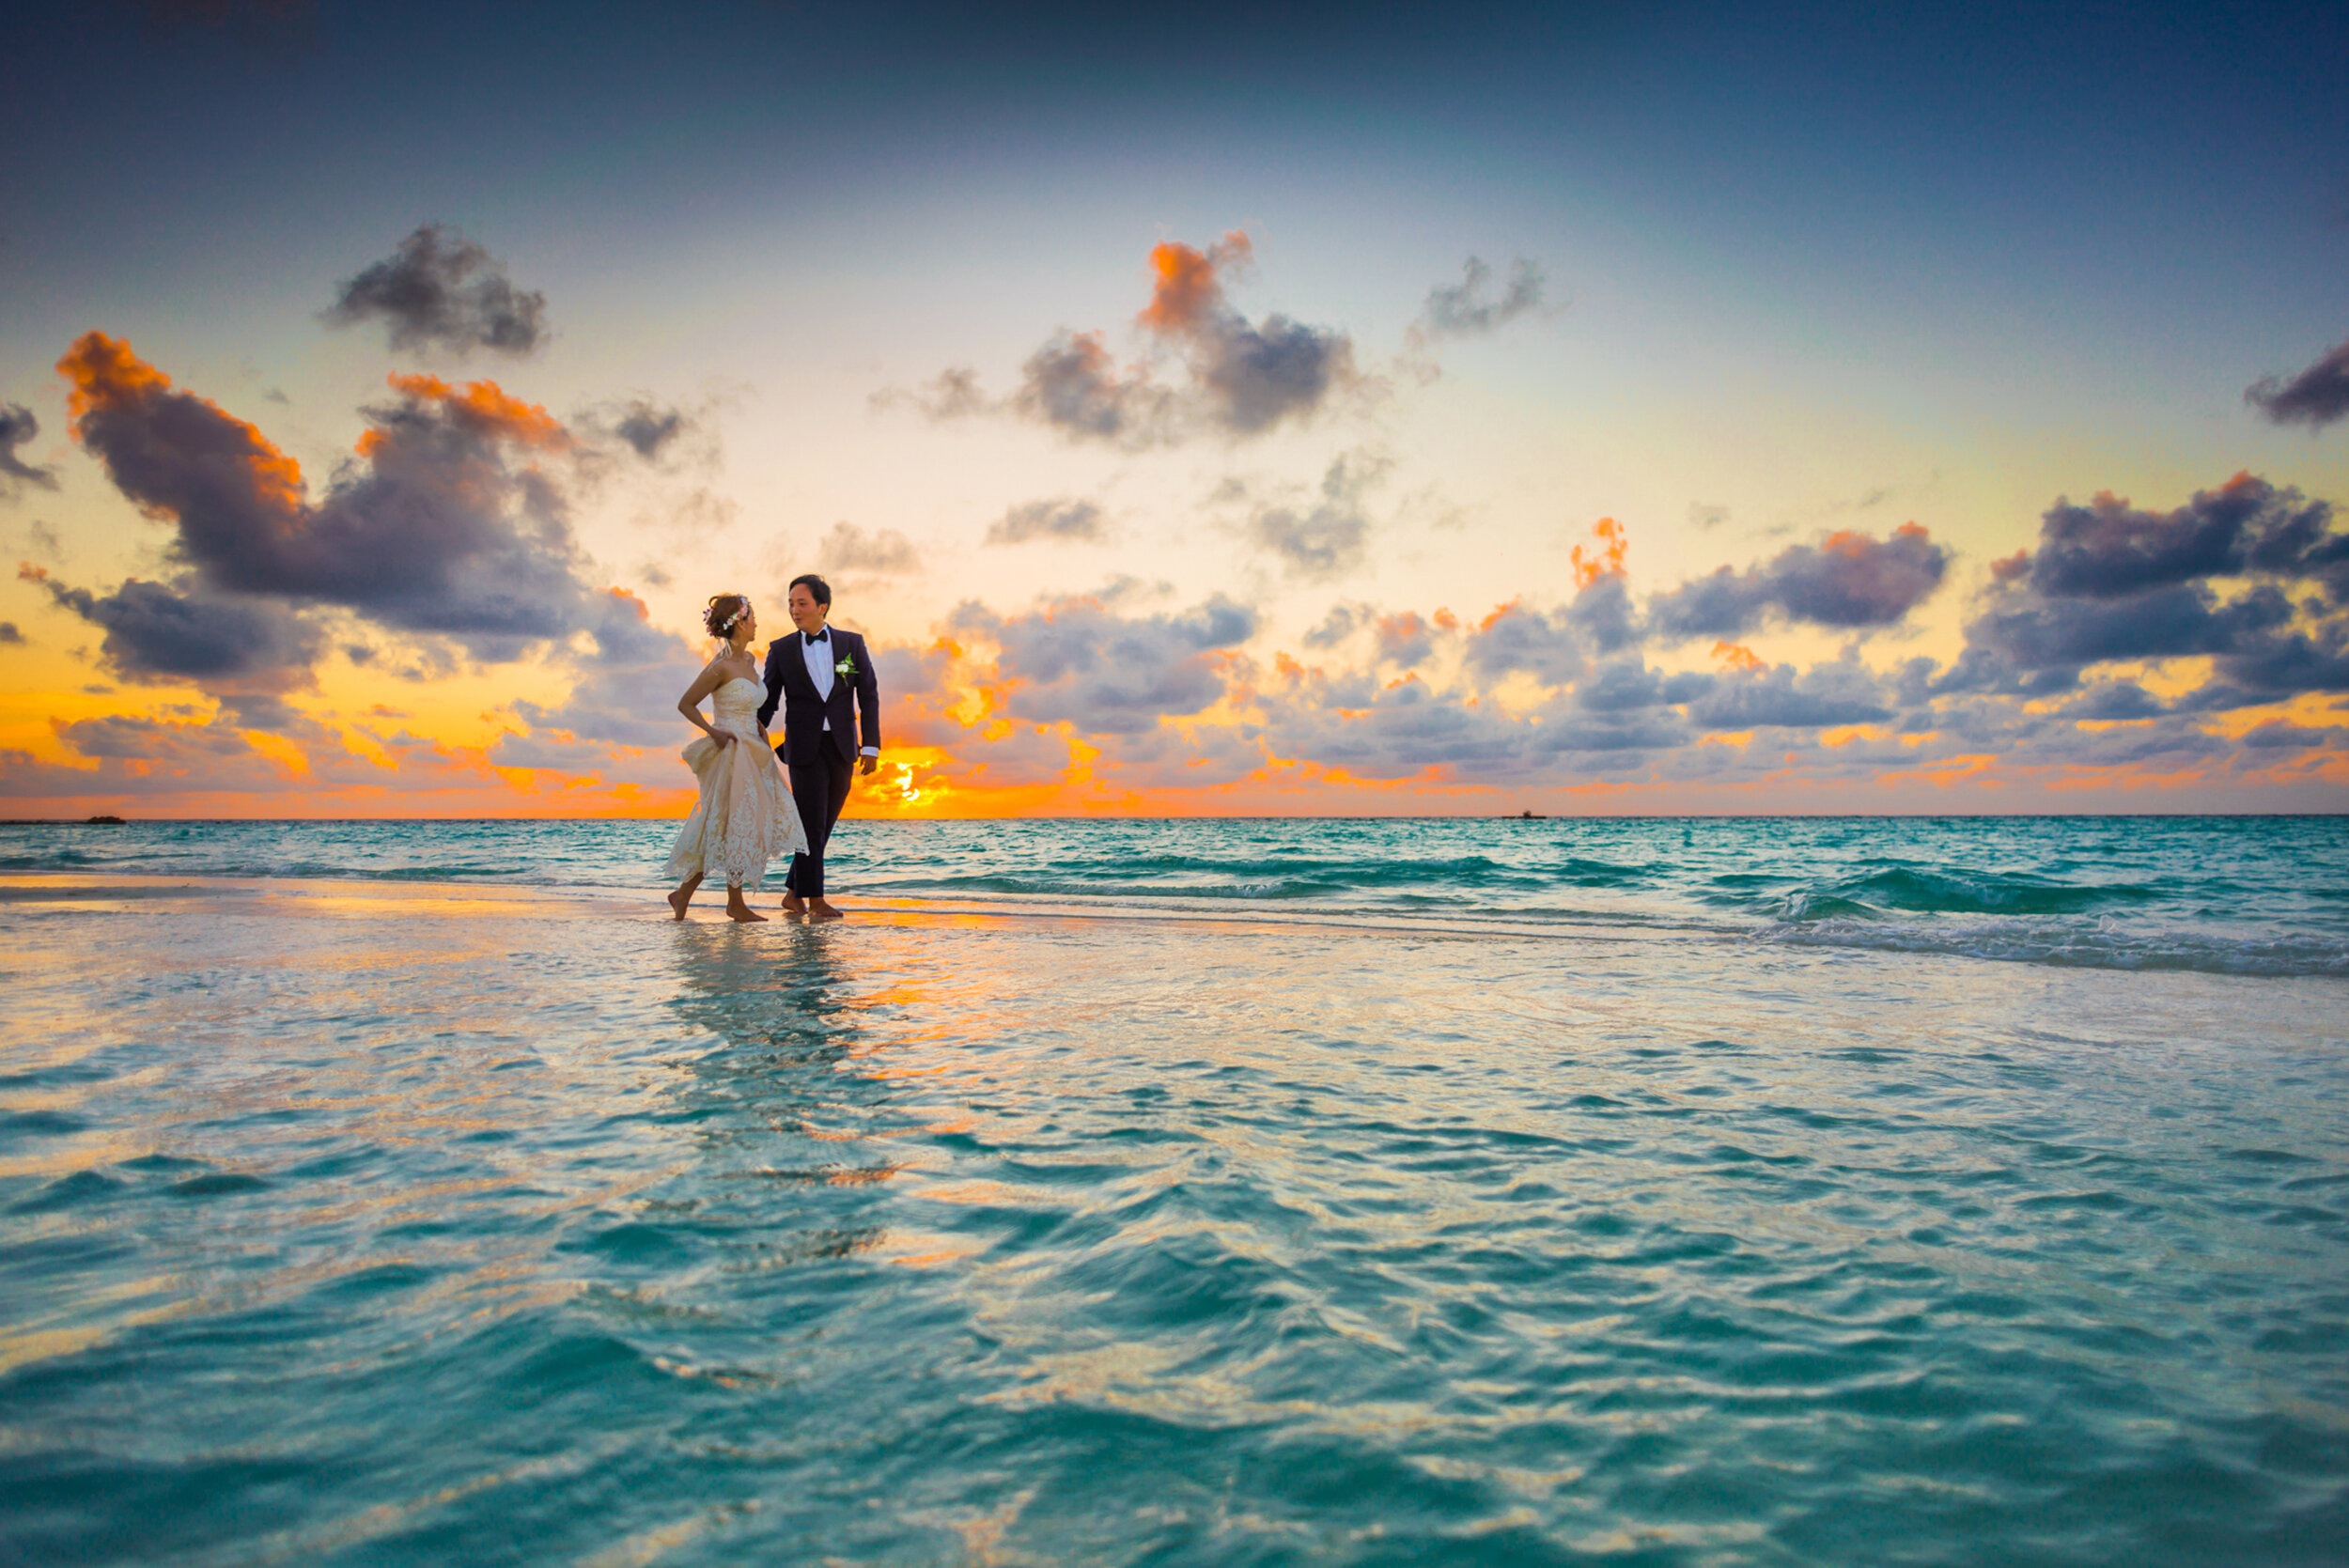 Man and Woman Walking of Body of Water.jpg